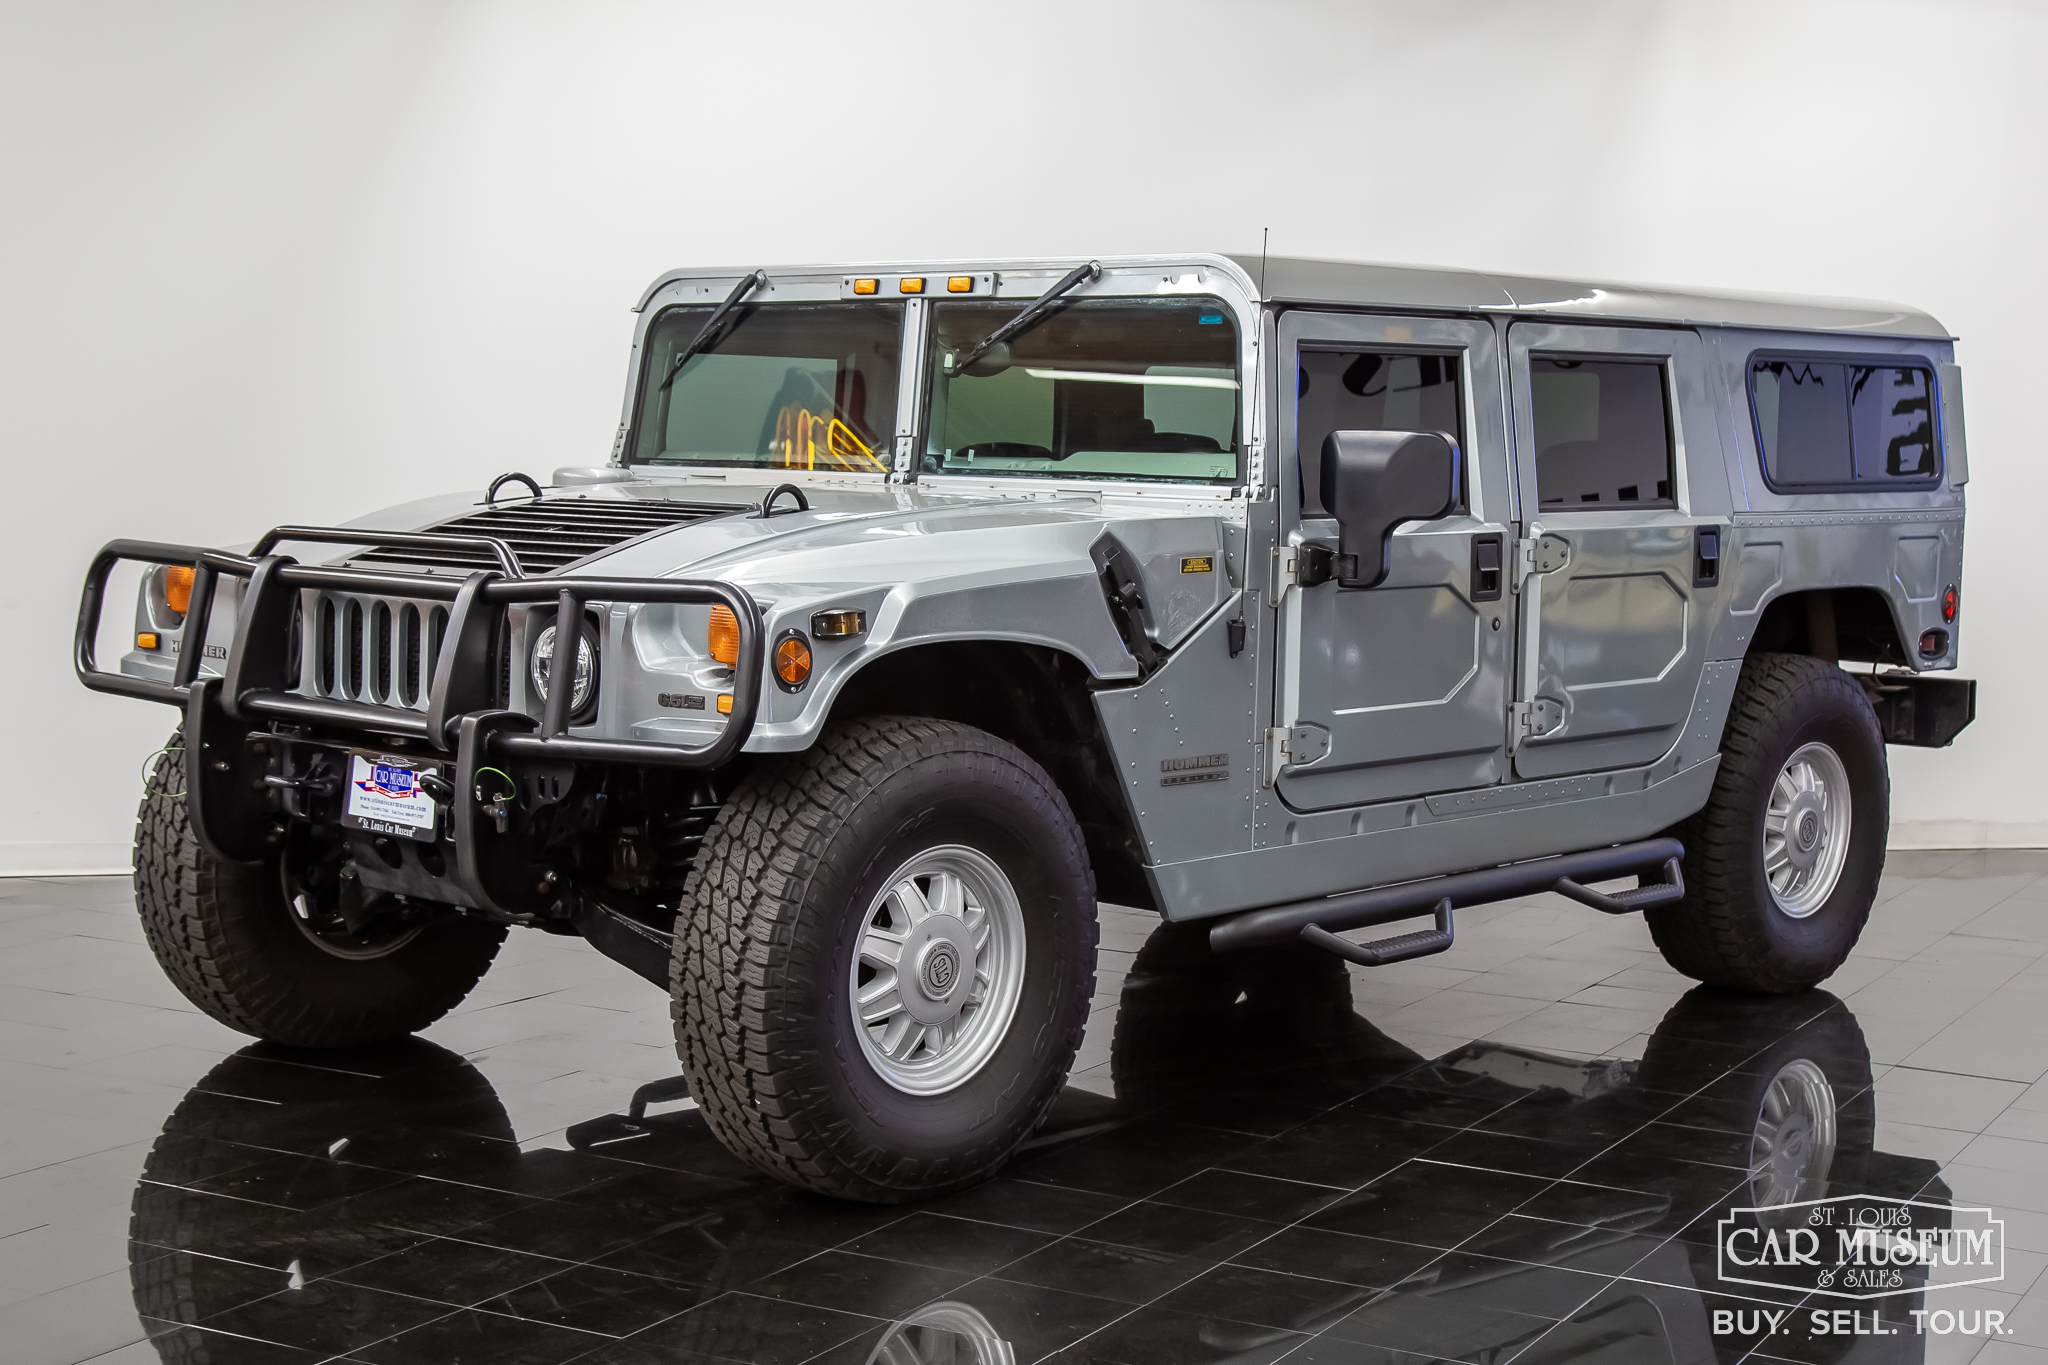 2001 Hummer H1 Turbodiesel Wagon For Sale